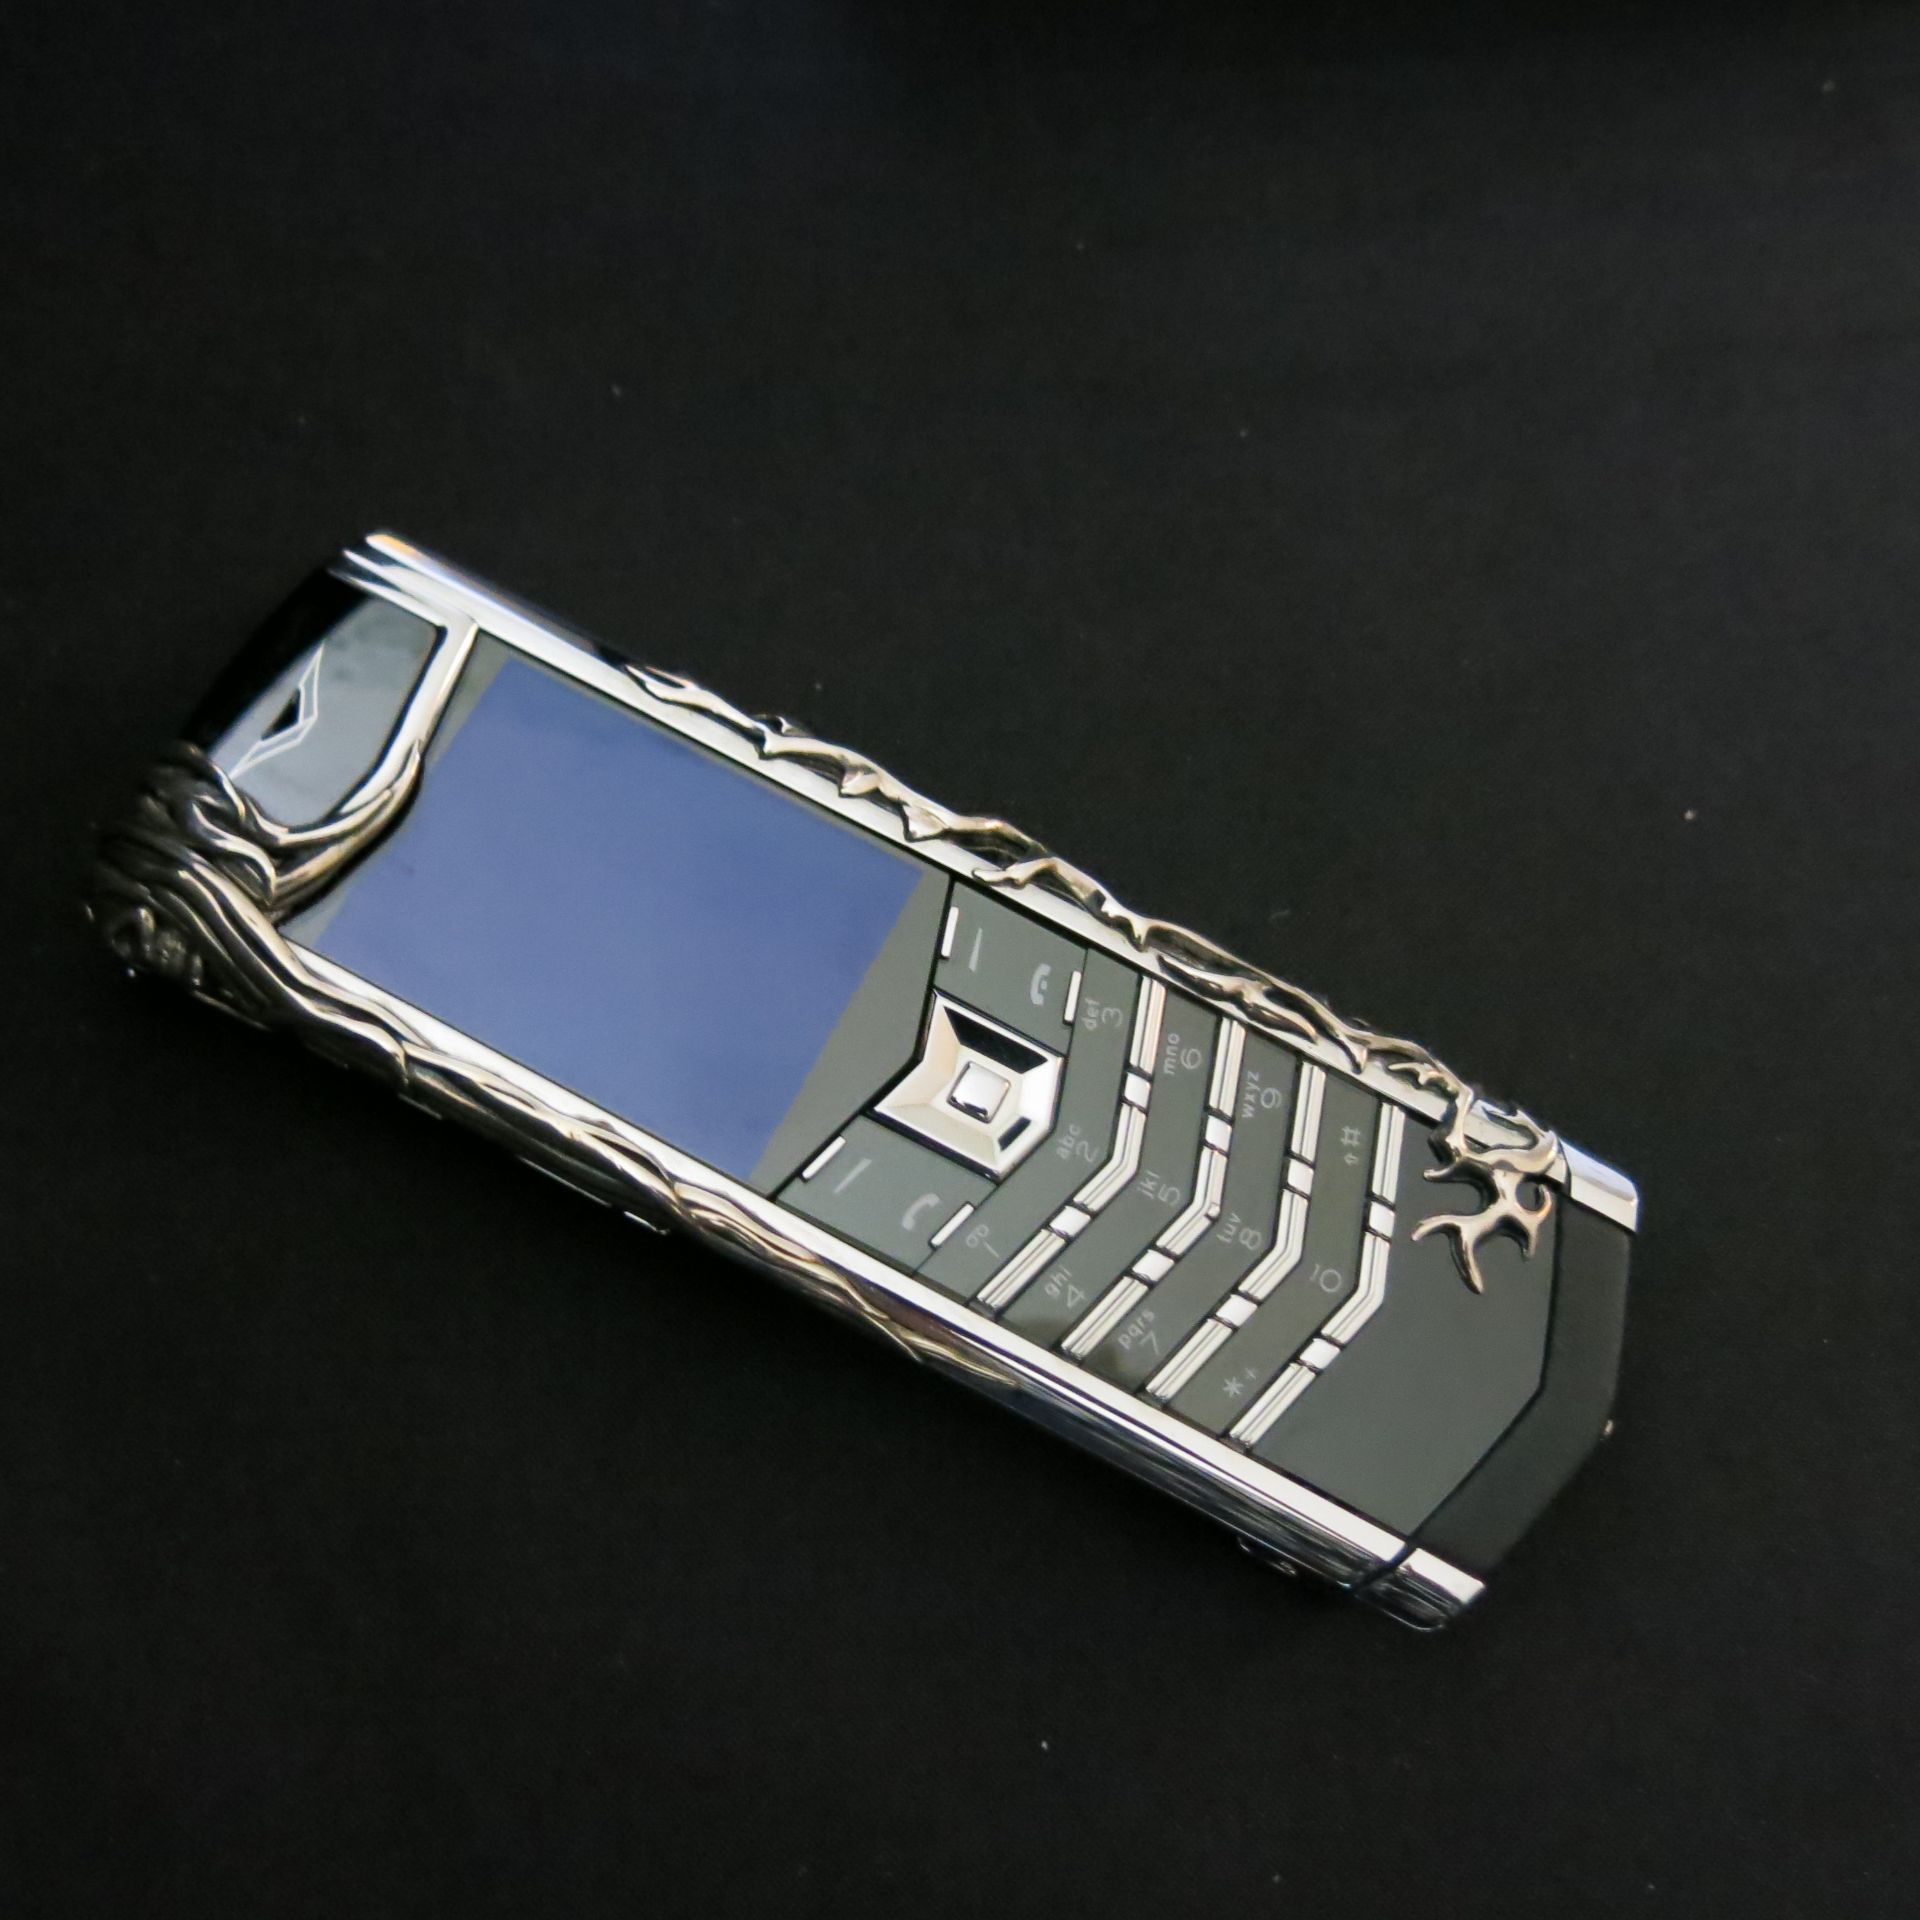 Entire Contents of the VERTU Museum Collection to Include: 105 Various Iconic Phones & Appearance - Image 10 of 106